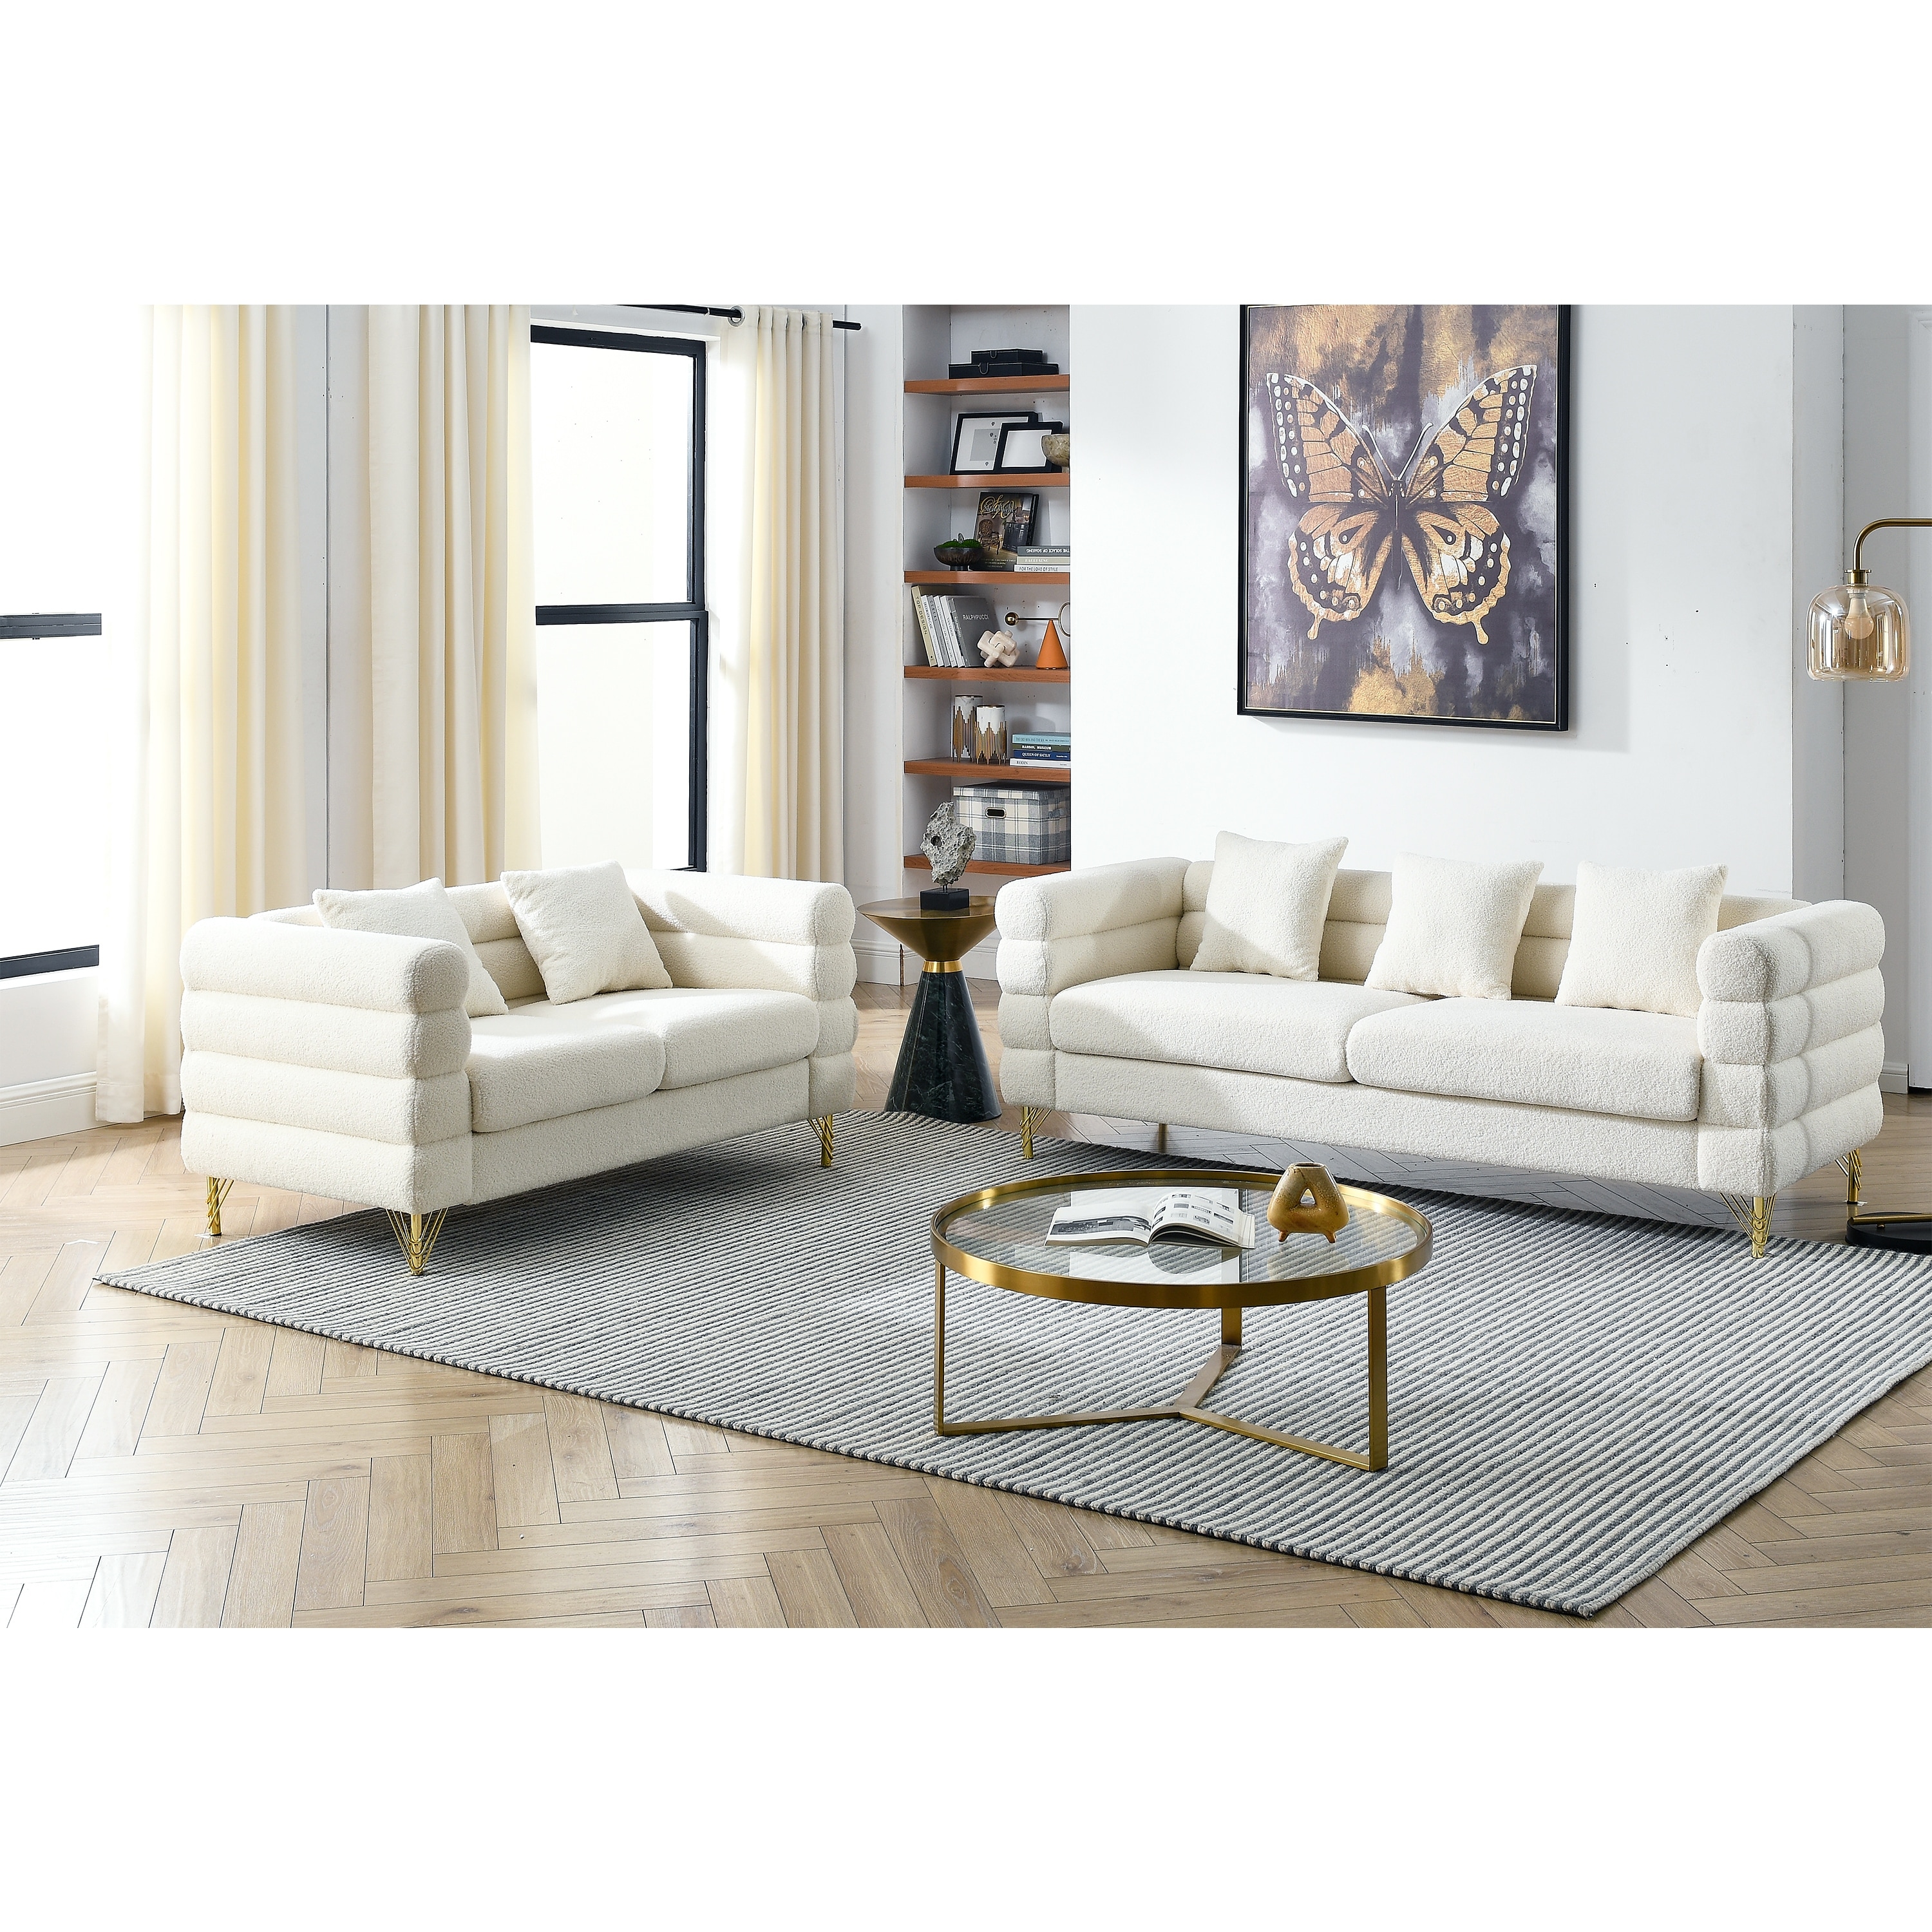 https://ak1.ostkcdn.com/images/products/is/images/direct/366ddda5bc1660f377548d46ec48175d3415fc98/2-Piece-Teddy-Fabric-Upholstered-3-Seater-Sofa-Couch-and-Loveseat-Sofa-Sets%2C-Living-Room-Deep-Seating-Sofa-with-Lumbar-Pillows.jpg